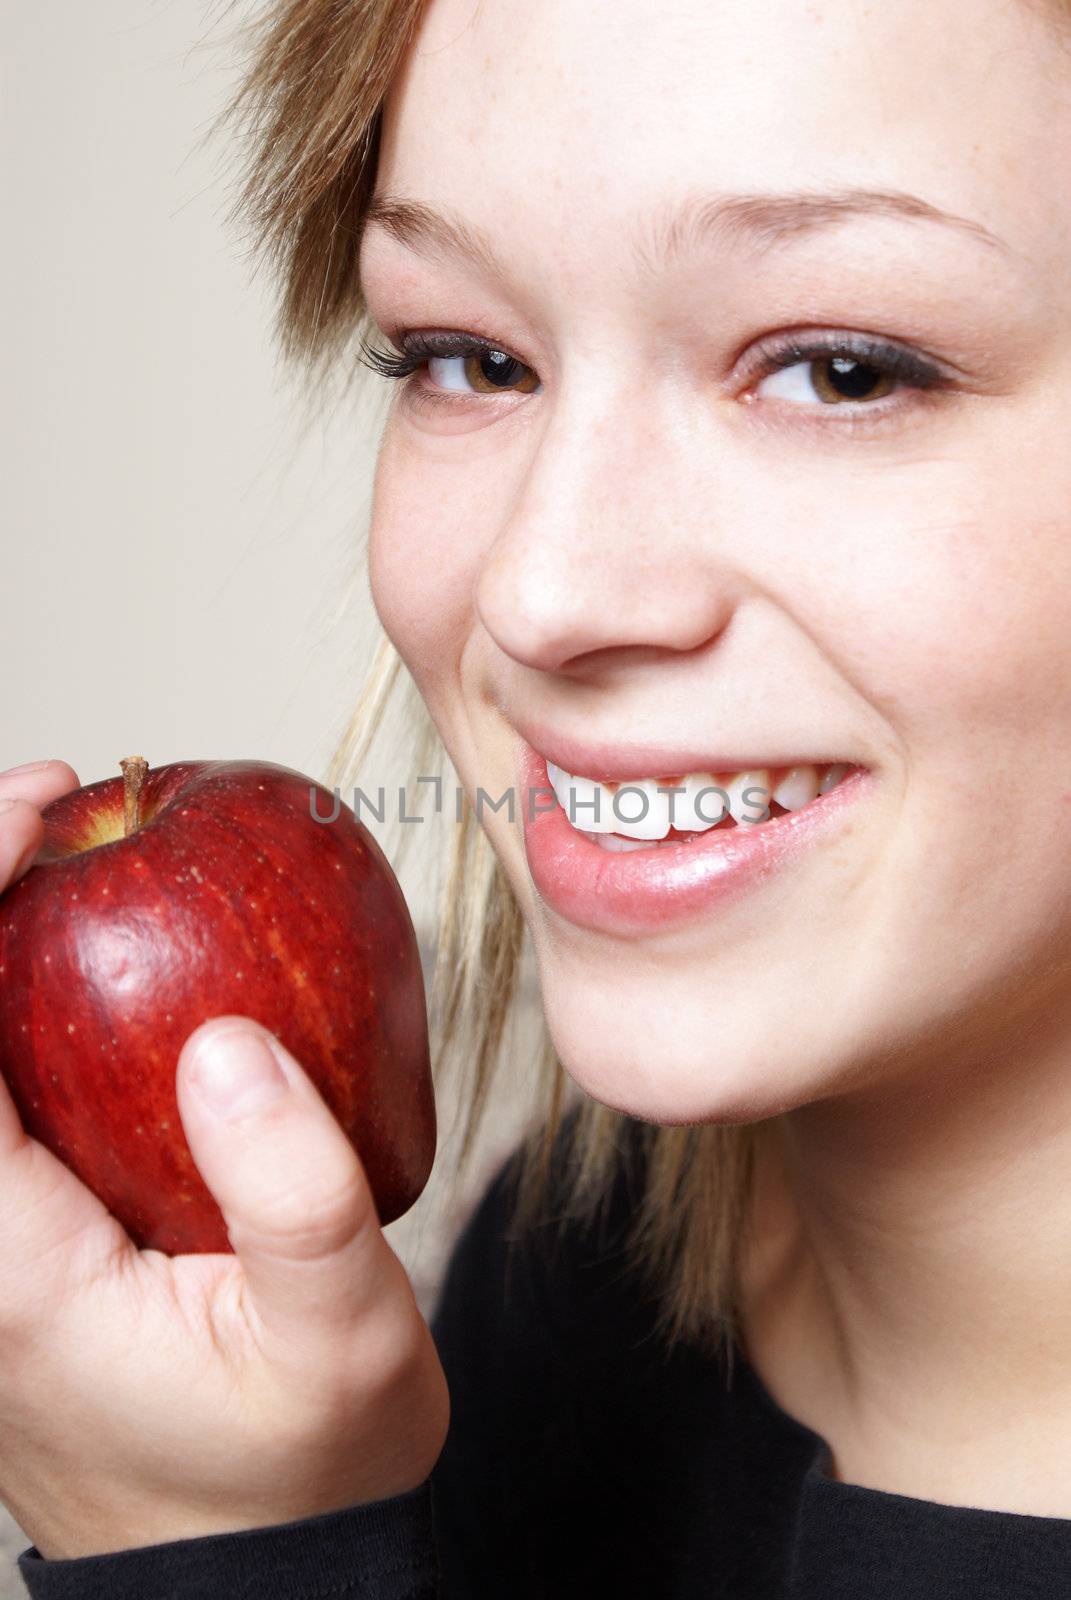 A happy young woman stays healthy by eating some ripe fruit.